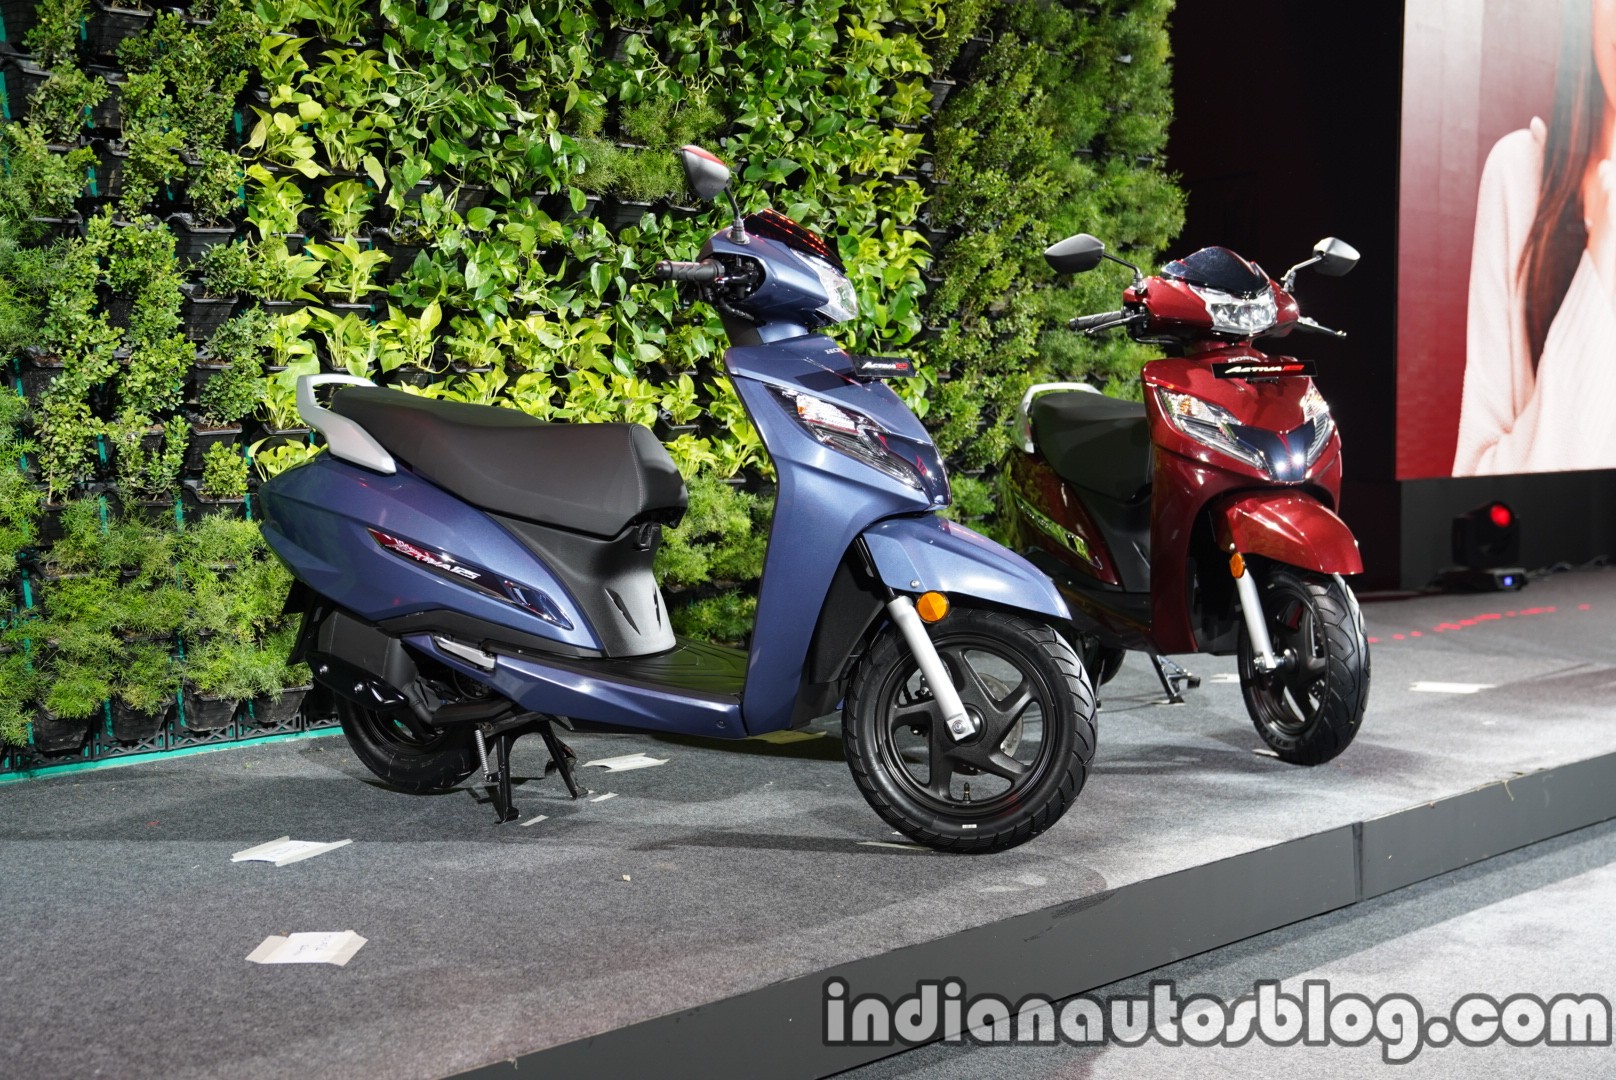 Activa 125 Bs6 All Colours